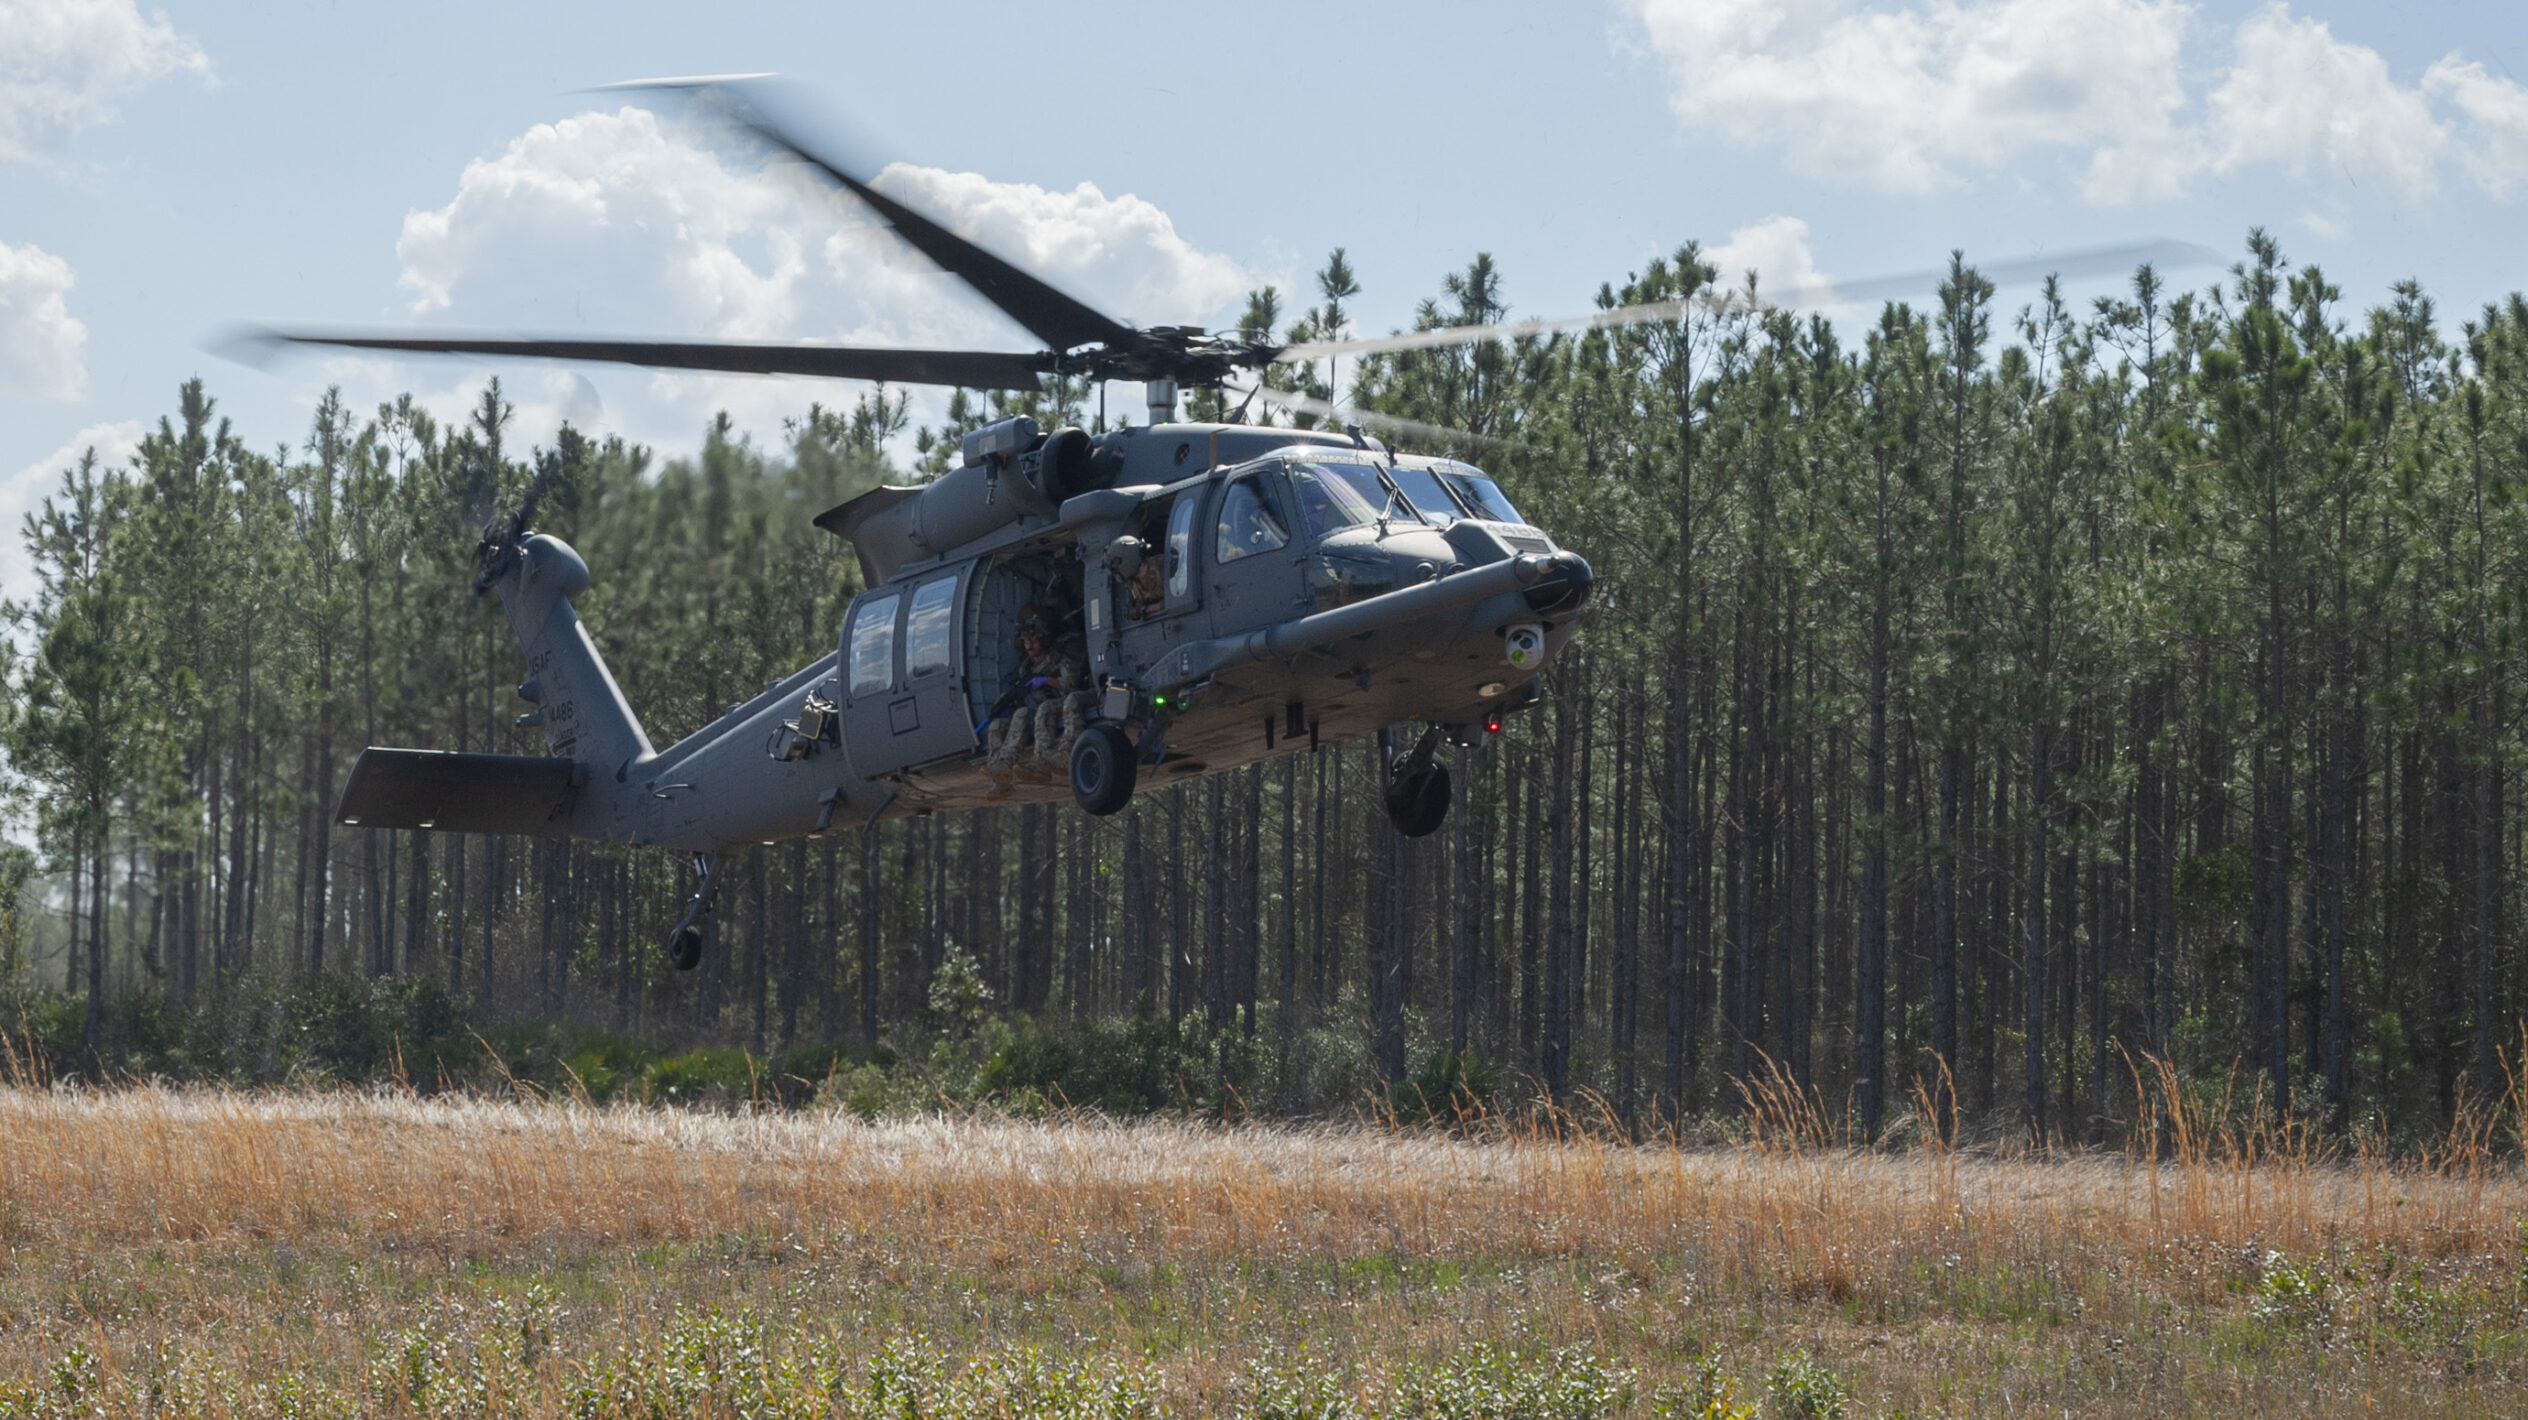 Sikorsky spins up to defend HH-60W combat rescue helicopter from planned cuts